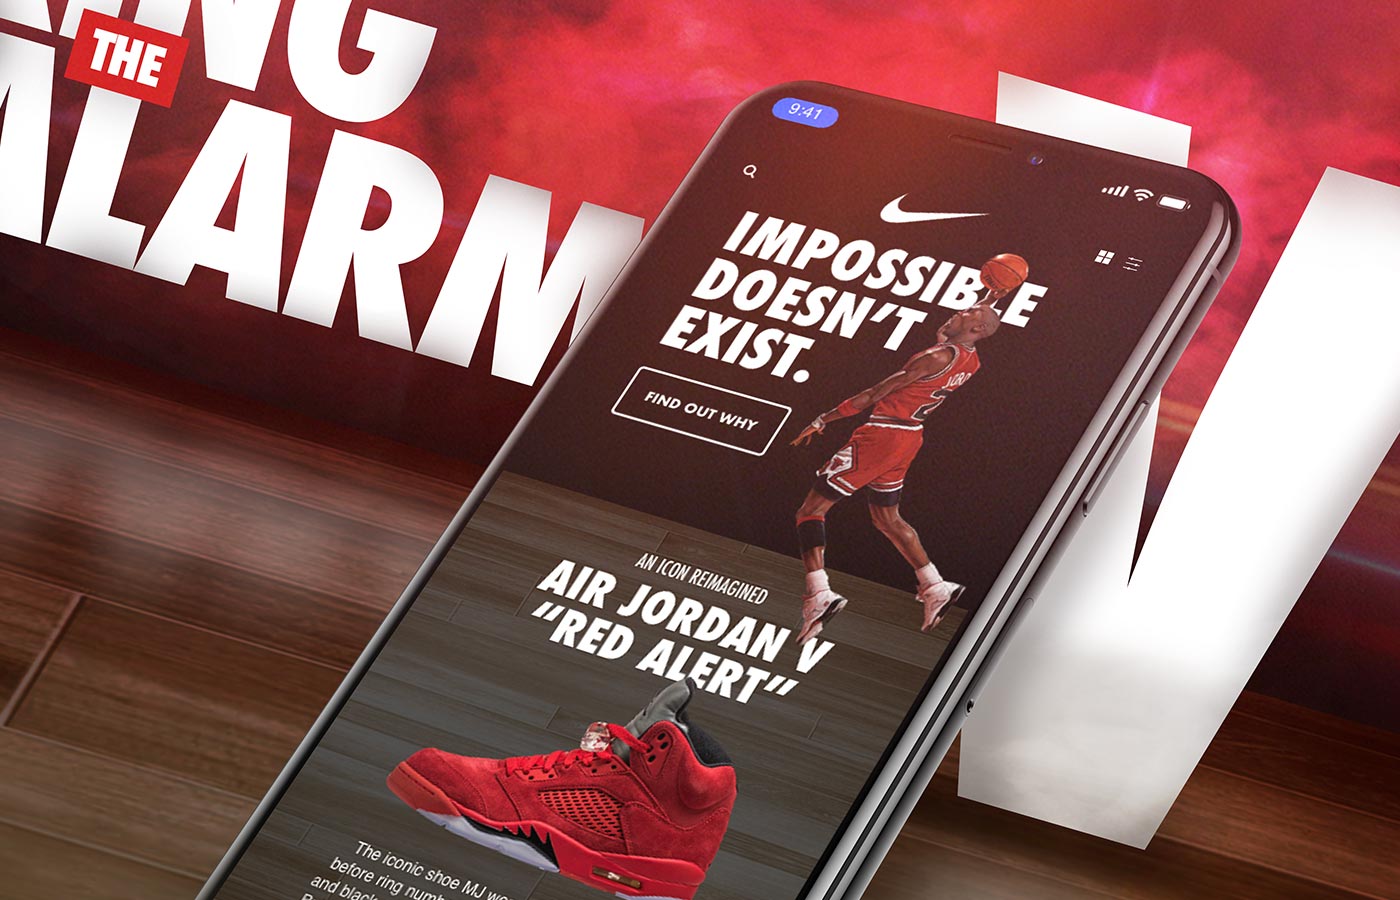 Nike SNKRS App UI Redesign Mockup in iPhone X | Enormous Elephant